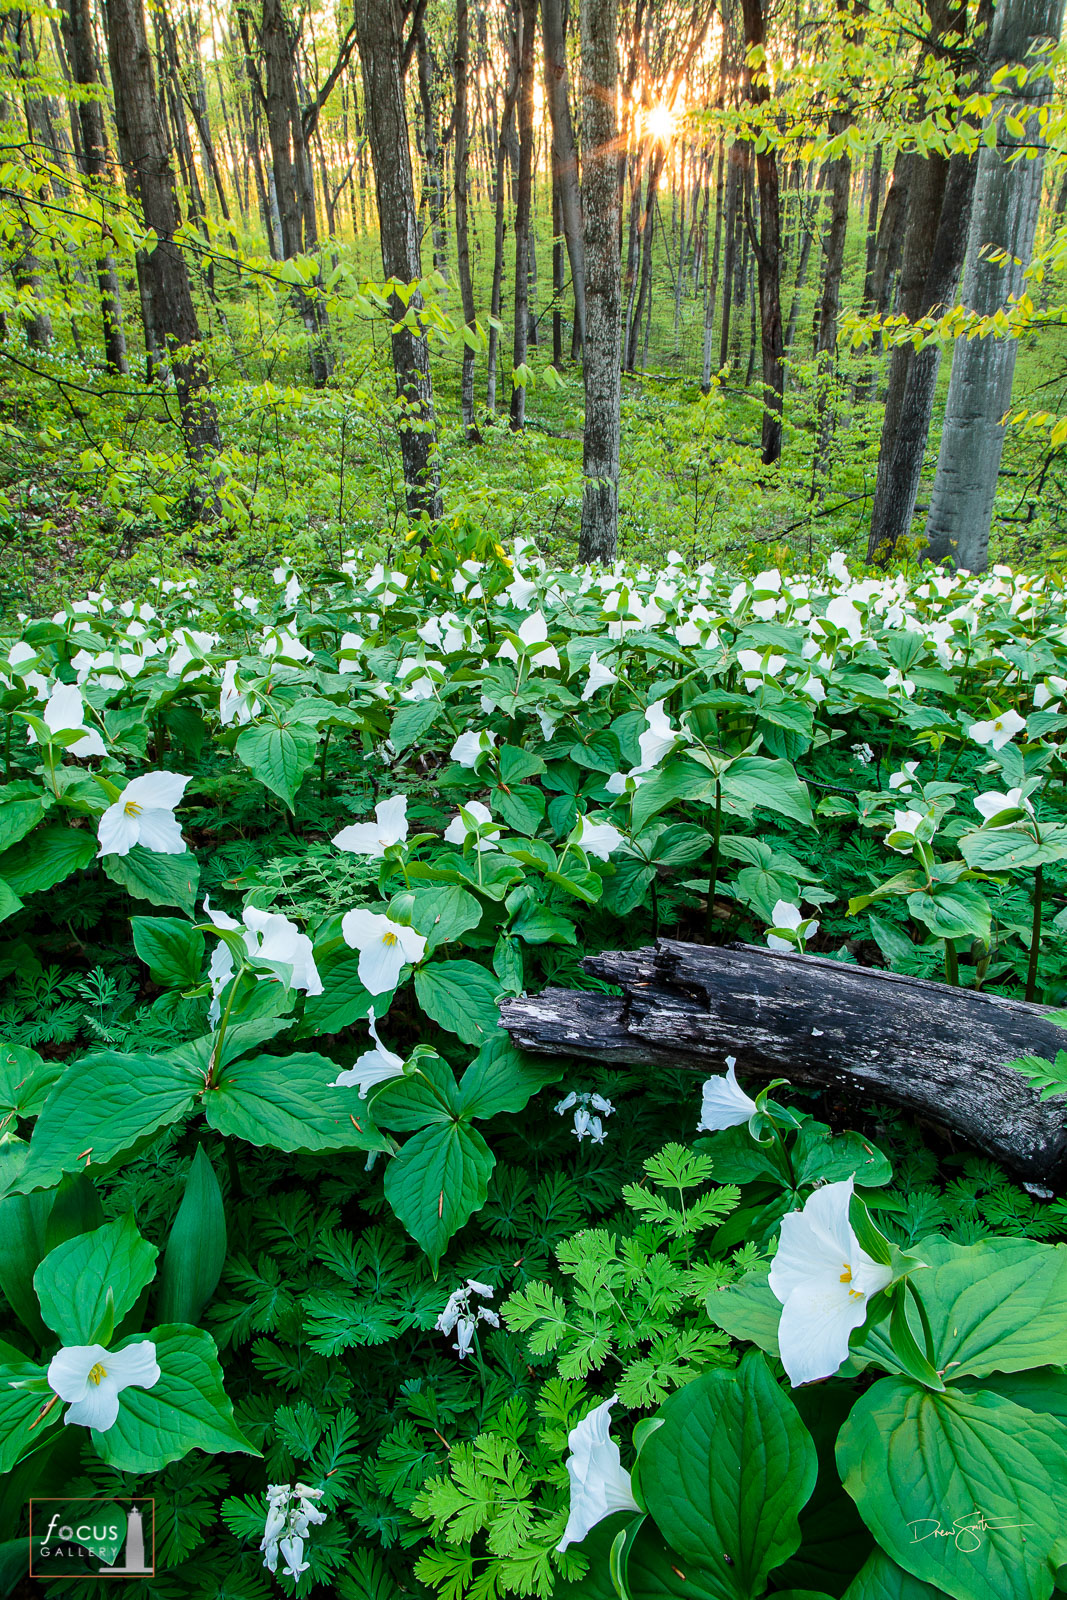 Sunset through woods filled with trillium wildflowers.